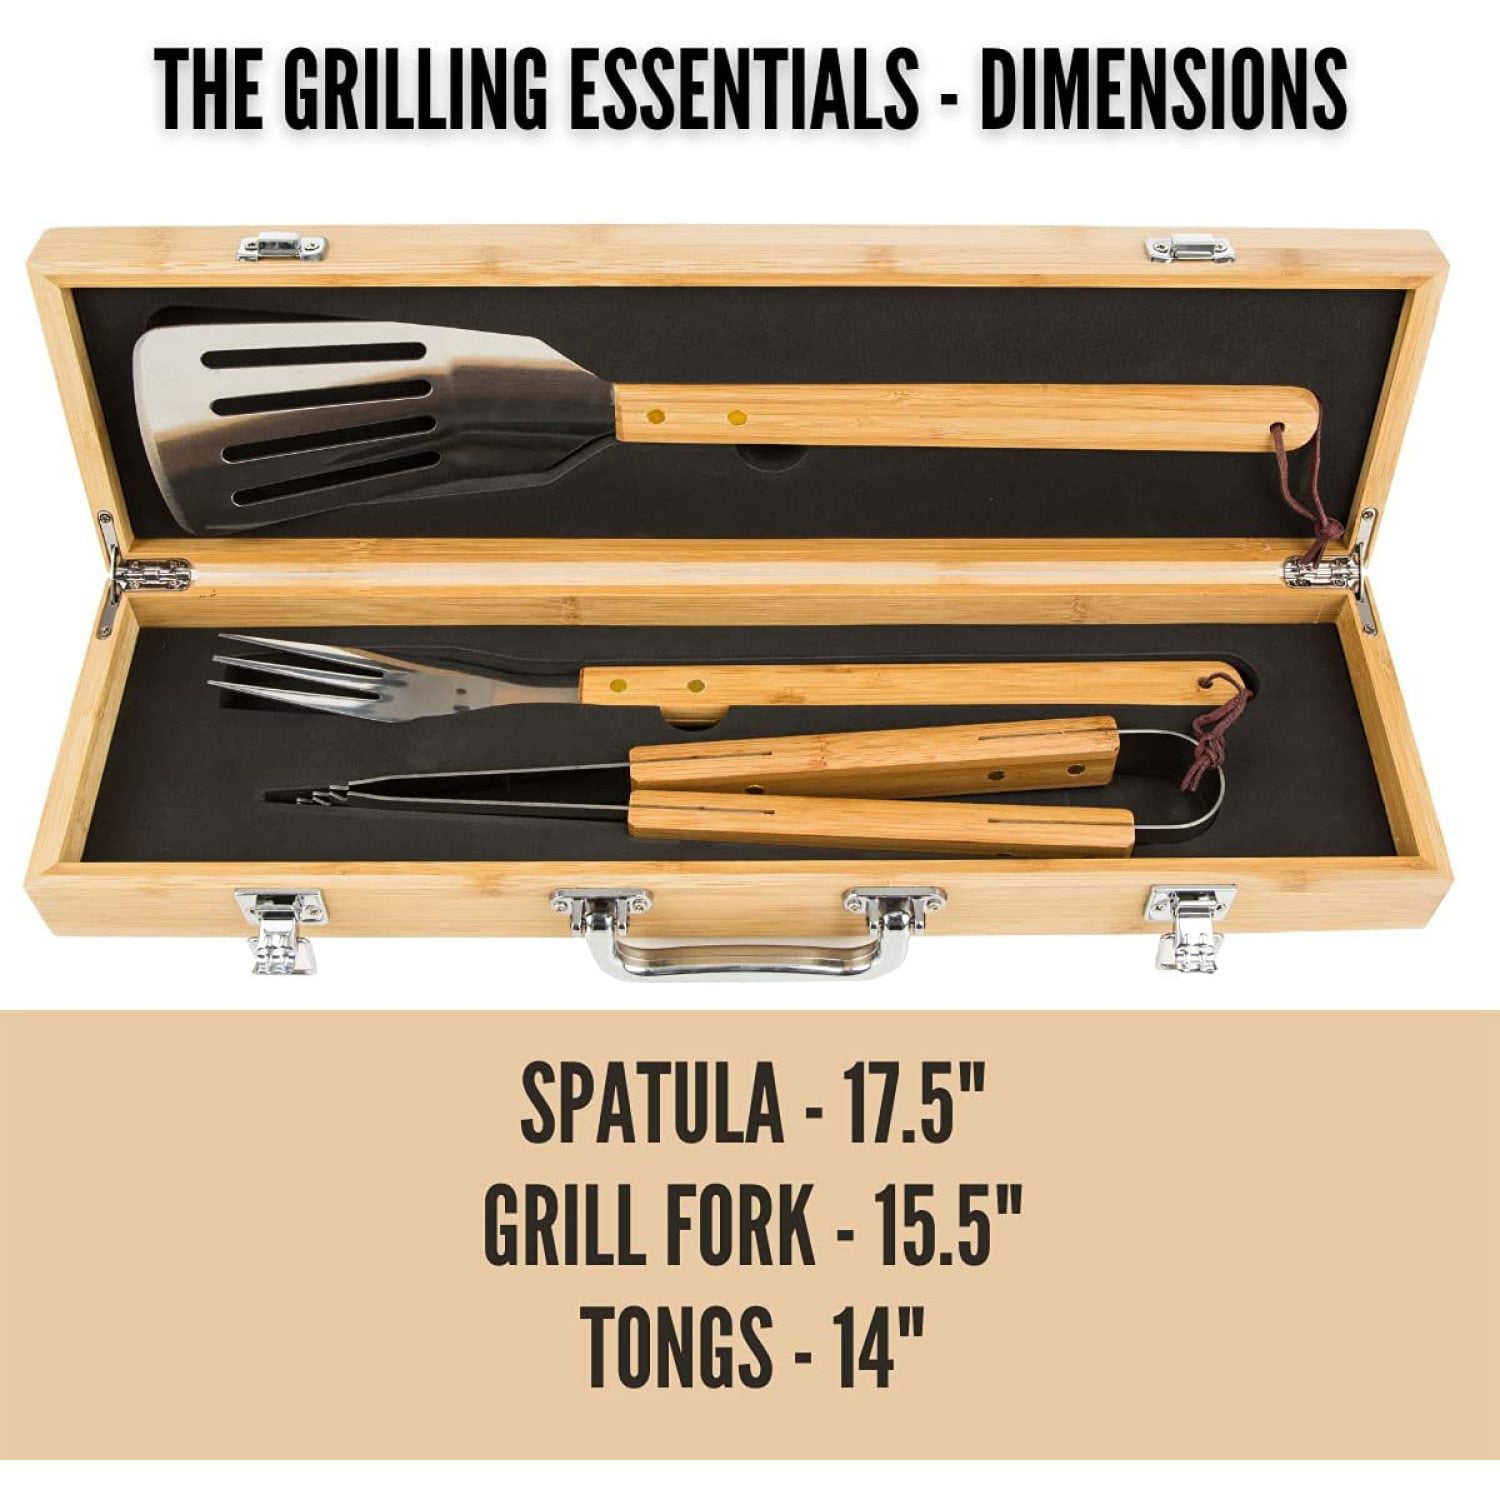 Personalized BBQ Set, Grill Gift Set, Groomsmen Gift, BBQ Set, Grilling  Tools, Gift for Dad Men, Father's Day Gift, Custom BBQ Set 